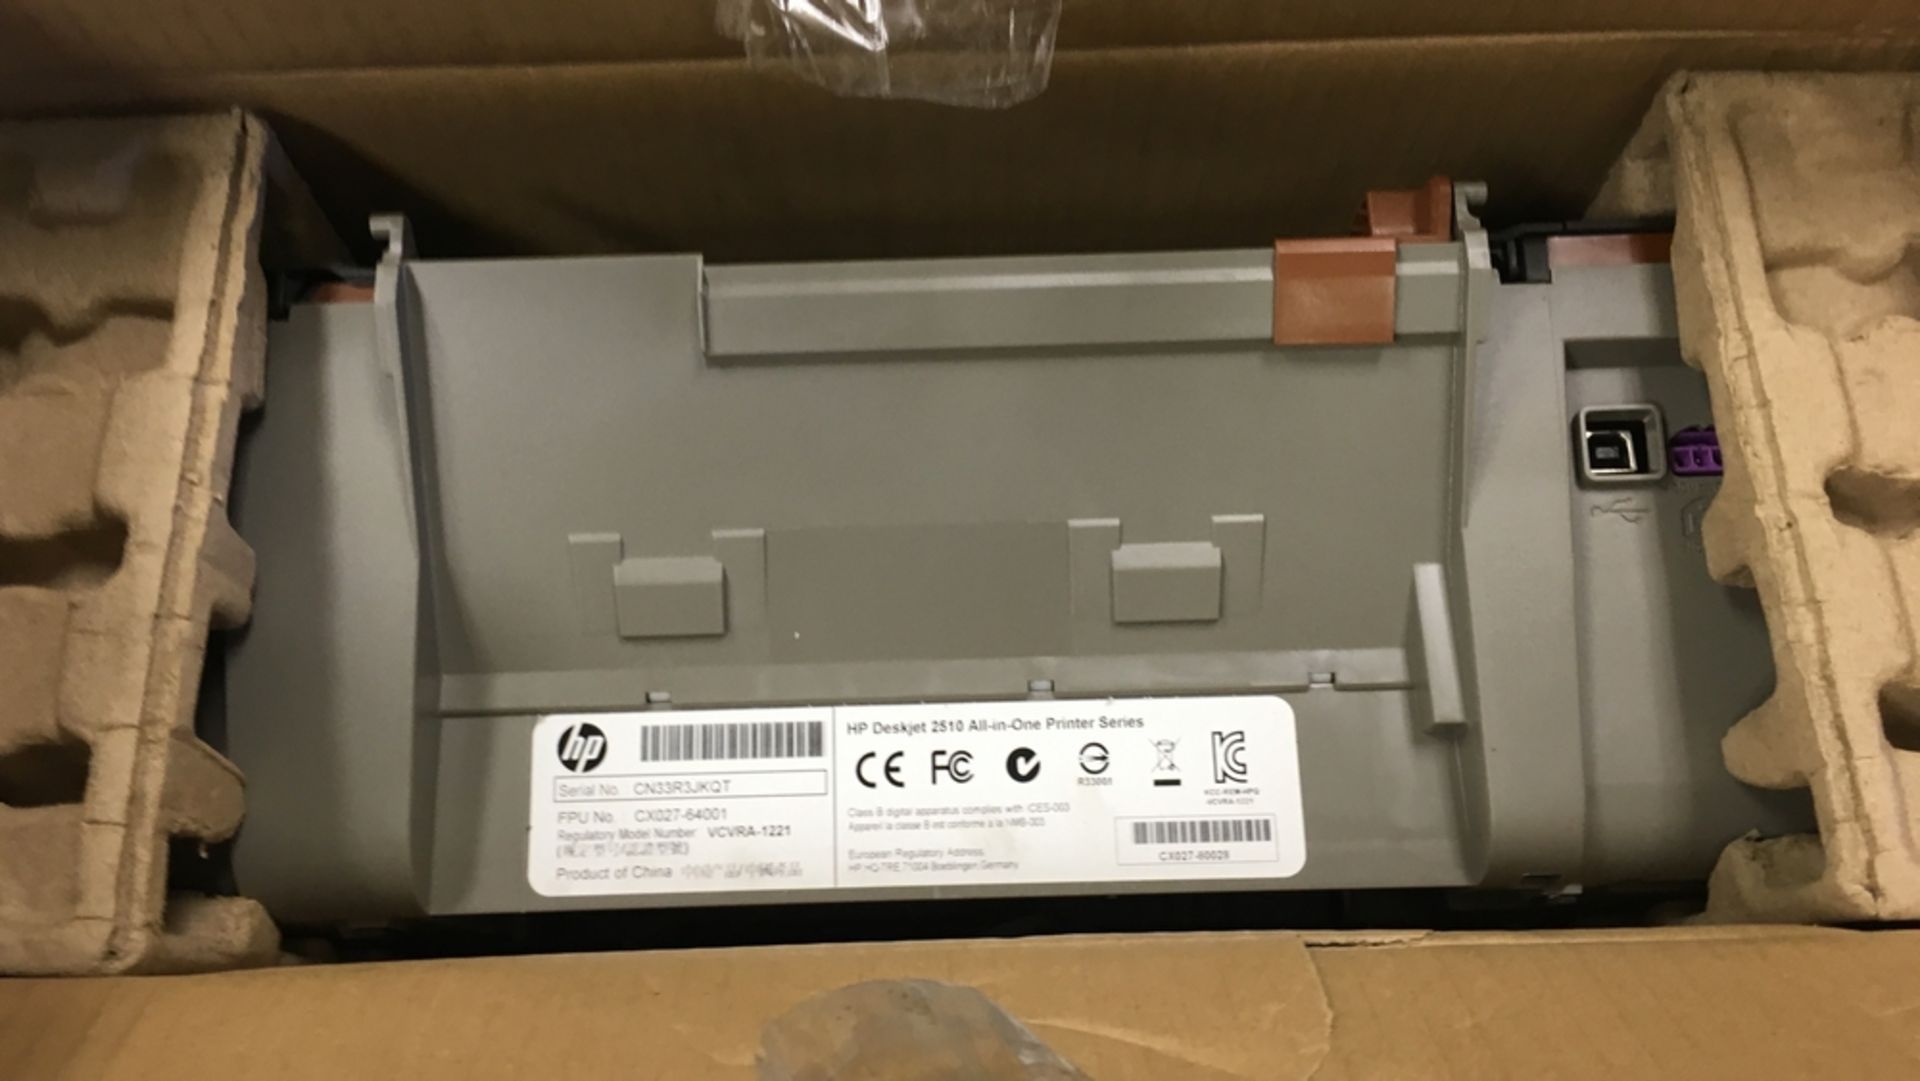 HP2512 PRINTER IN BOX OPEN BOXED ITEM - Image 3 of 3